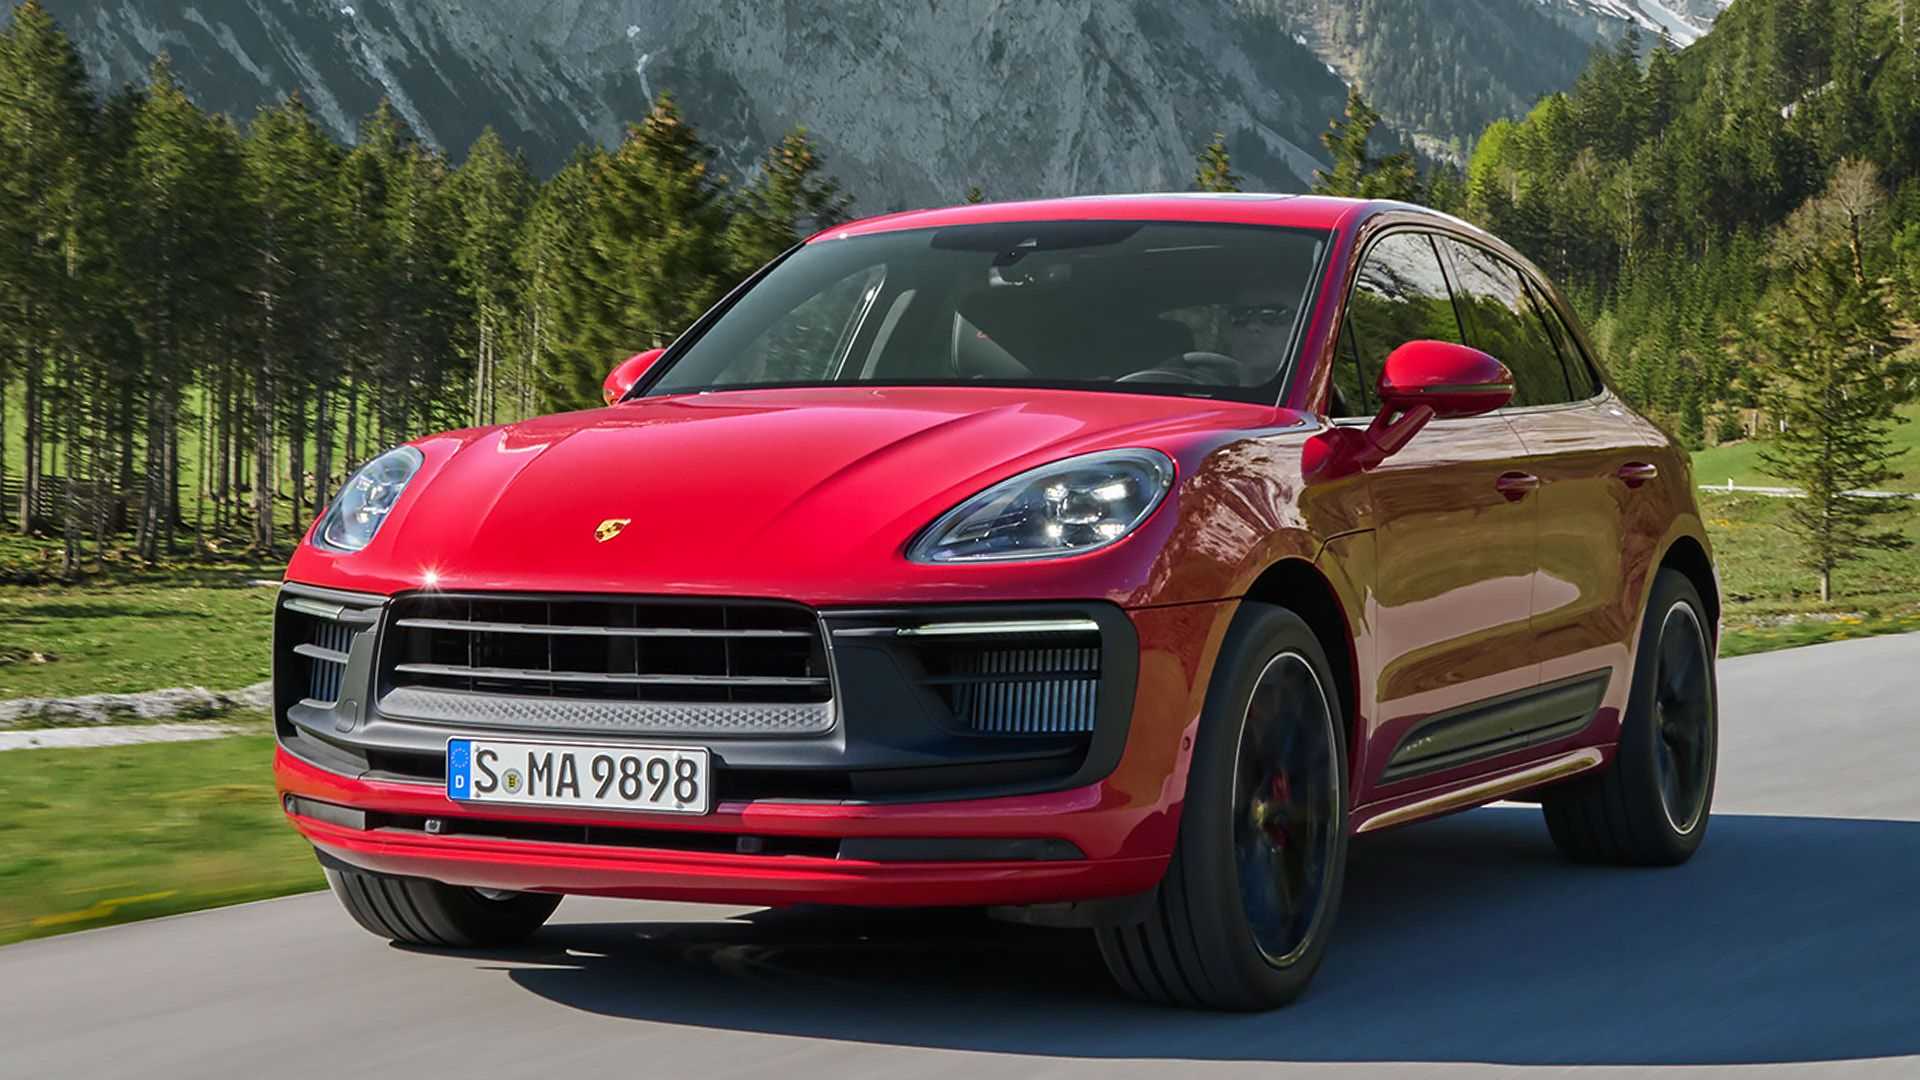 2022 Porsche Macan Debuts With More Power But Without ...